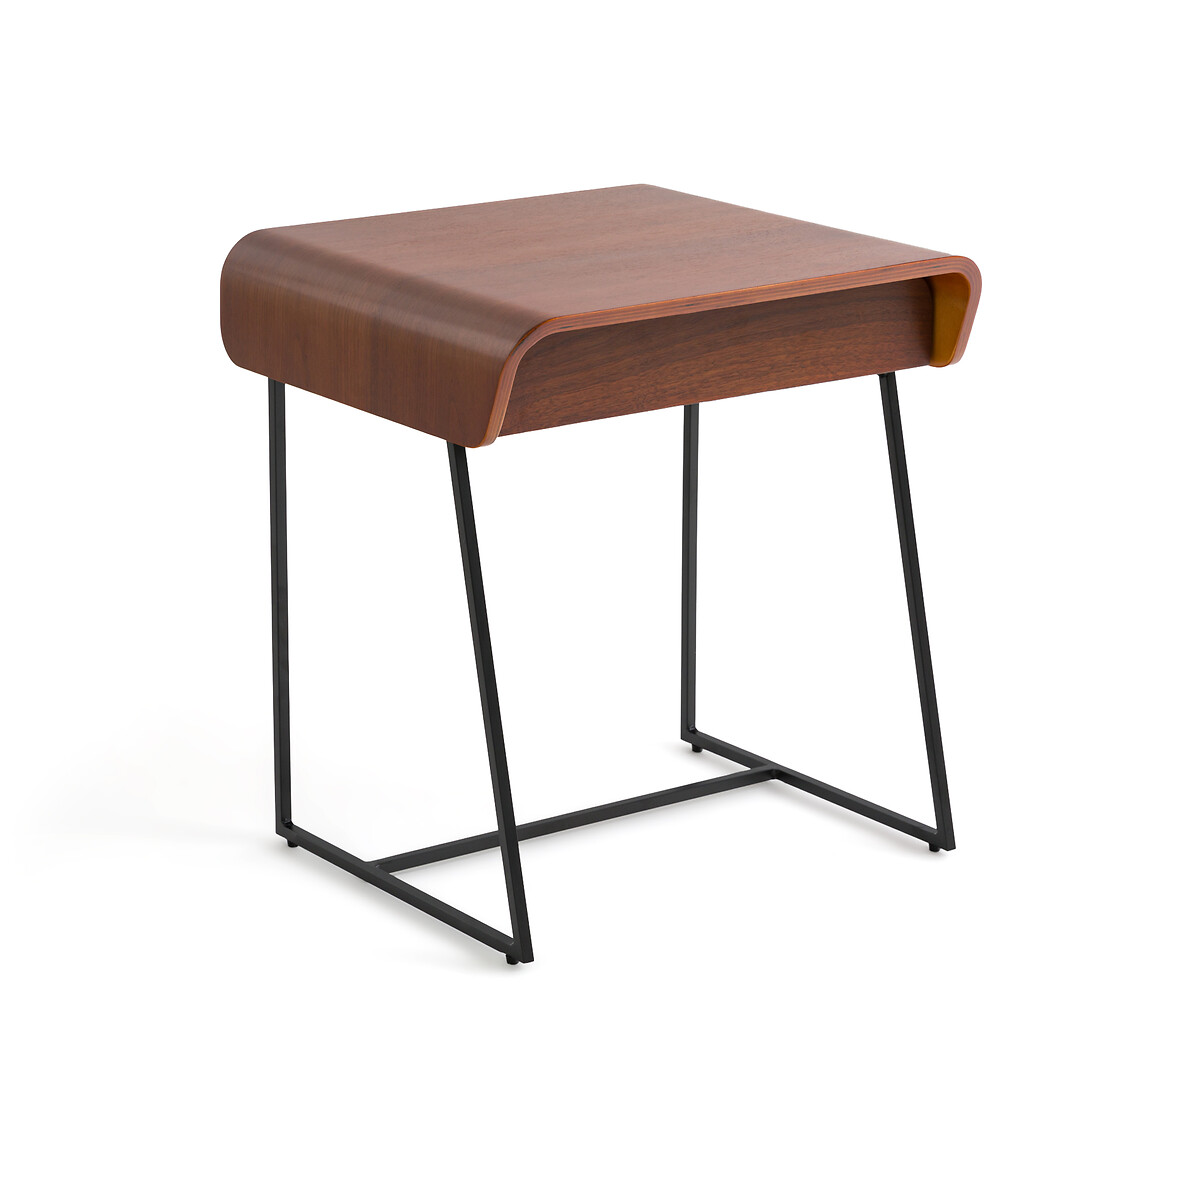 Bardi Walnut Bedside Table with Drawer, designed by E. Gallina